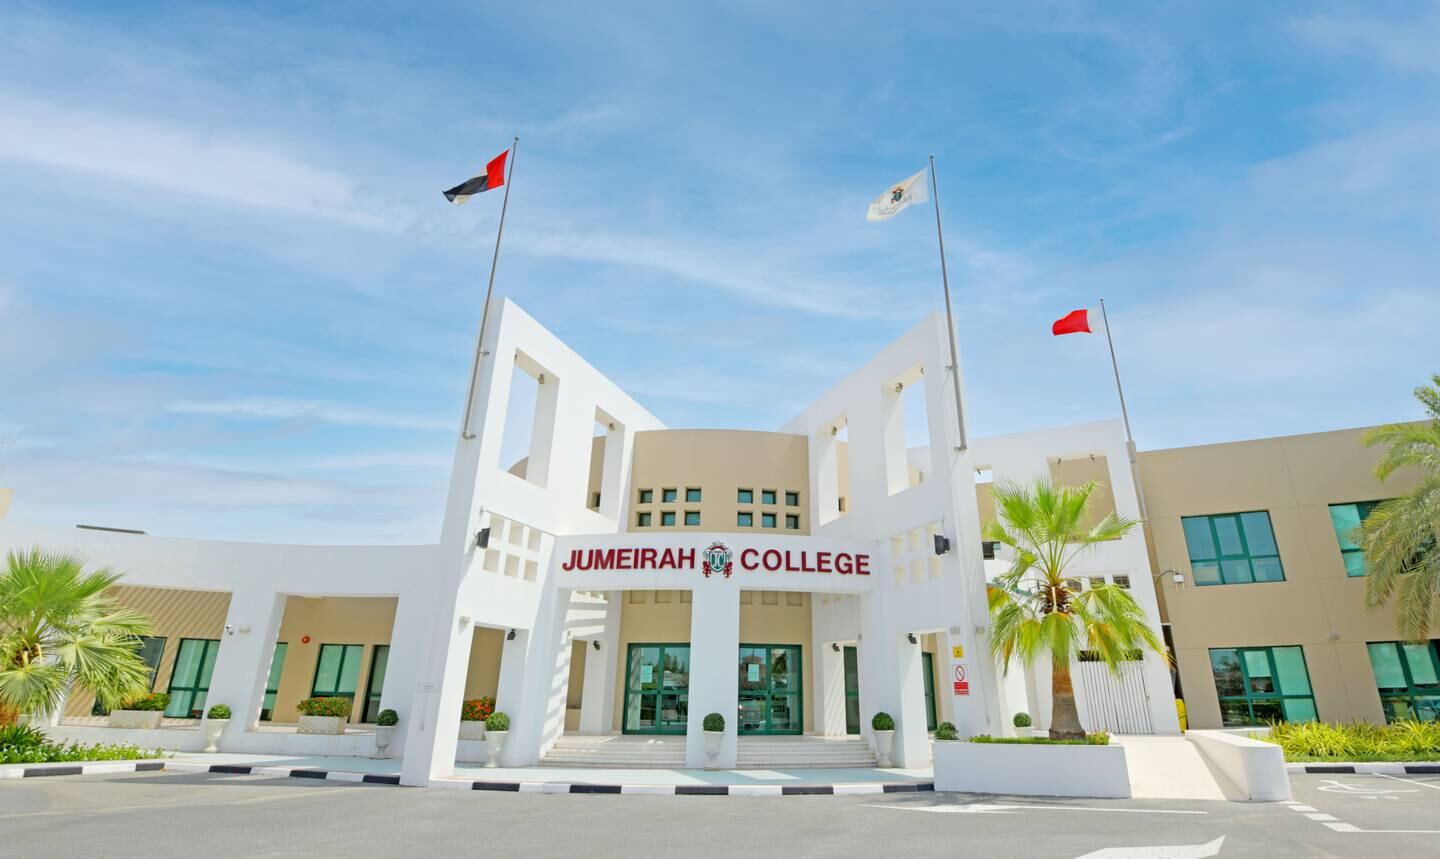 Jumeirah College has 1,125 pupils from more than 59 countries. Photo: Jumeirah College